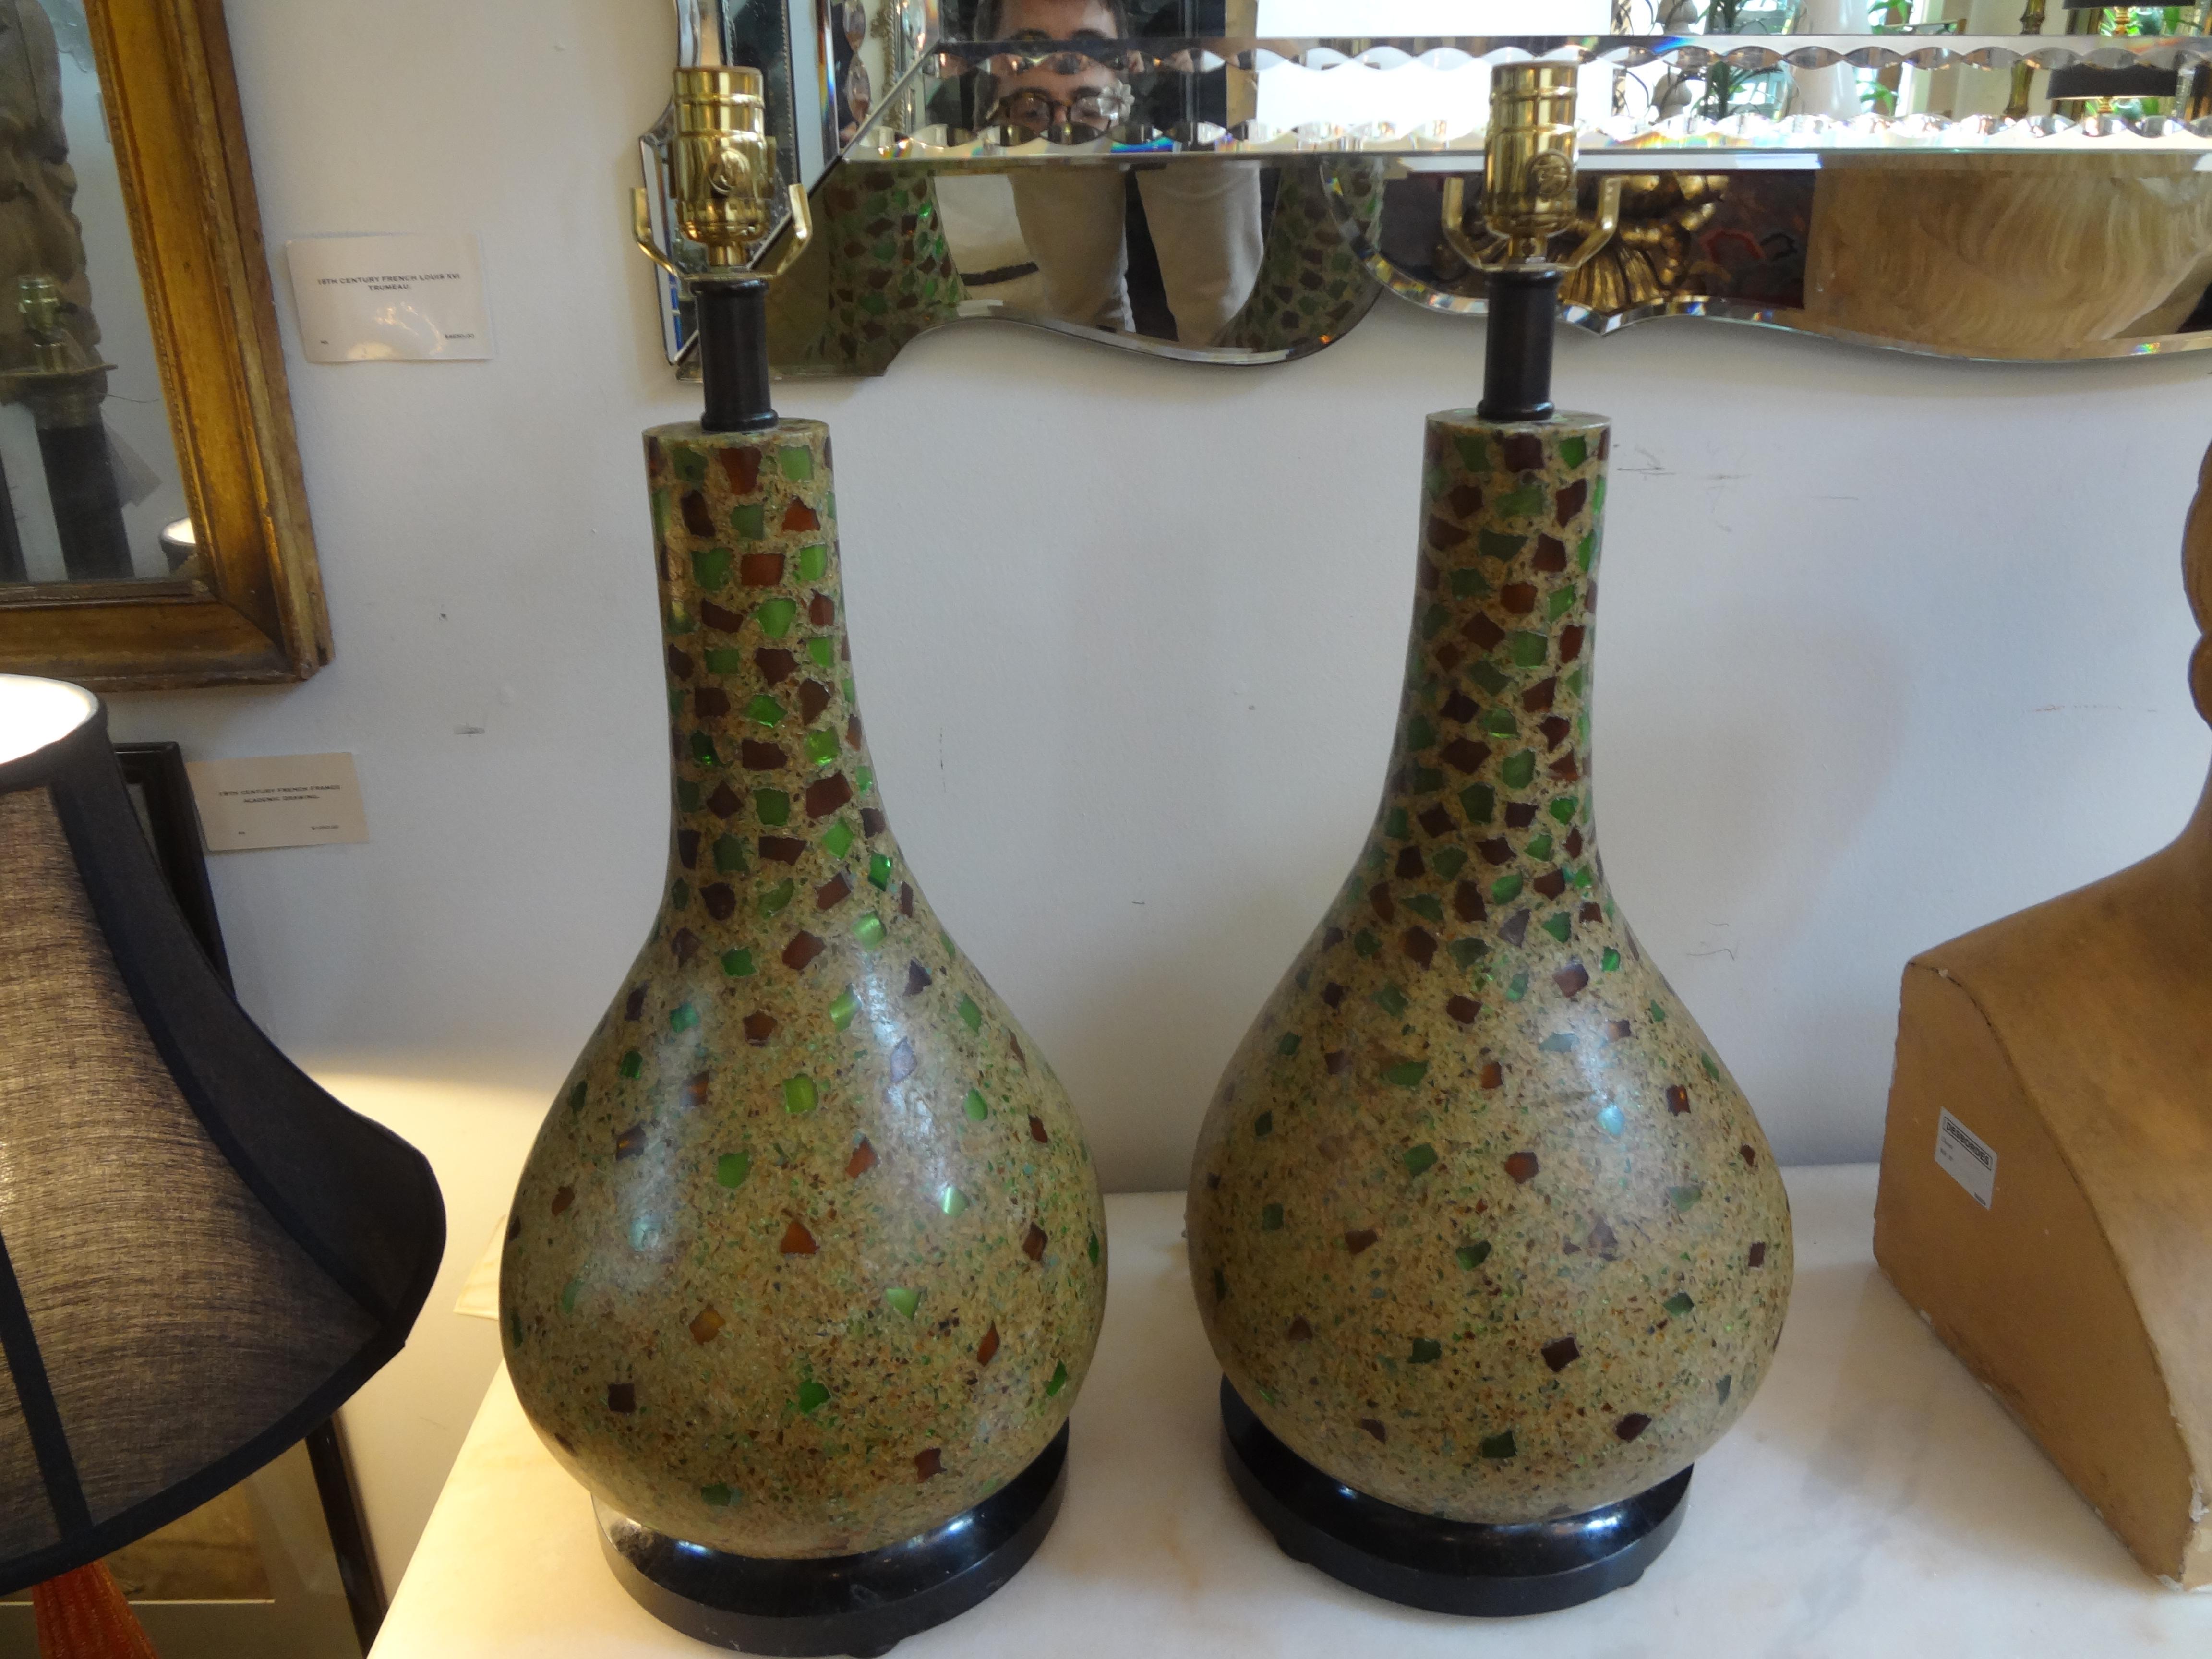 Pair of vintage Maitland Smith lamps on Tessellated stone bases.
Unusual large pair of Hollywood Regency Maitland Smith table lamps. These stunning lamps are gourd shaped with inlaid green and amber colored resin resting on tessellated stone bases.